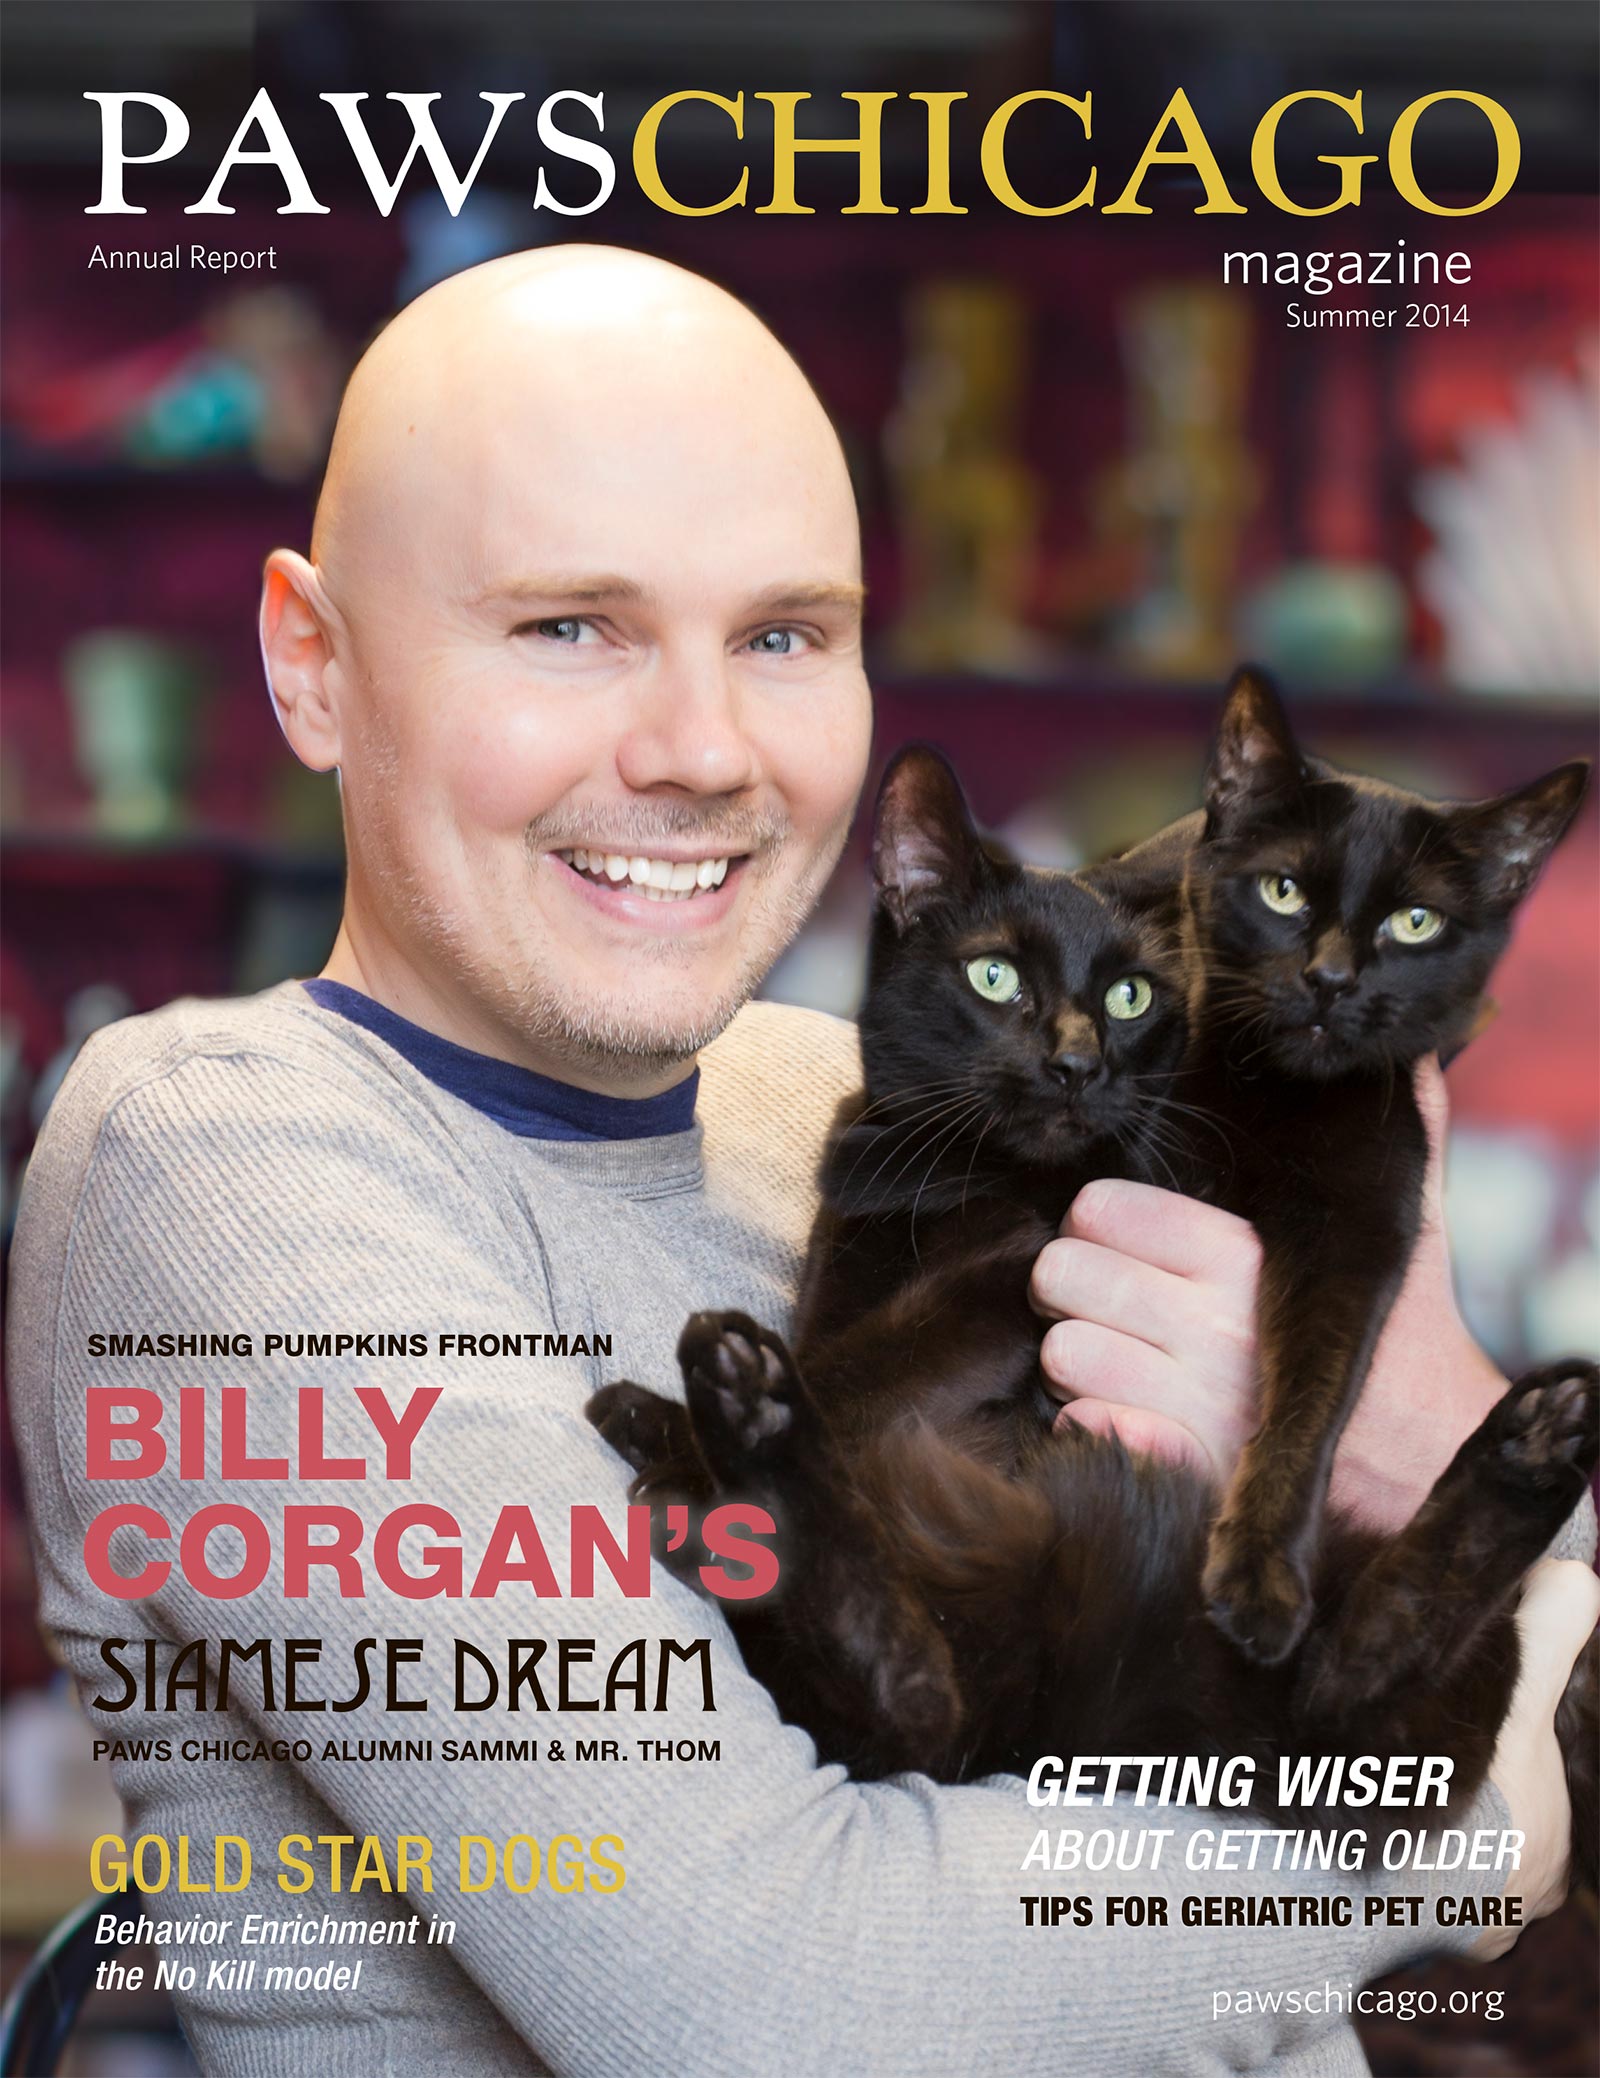 Billy Corgan poses for PAWS Chicago magazine cover